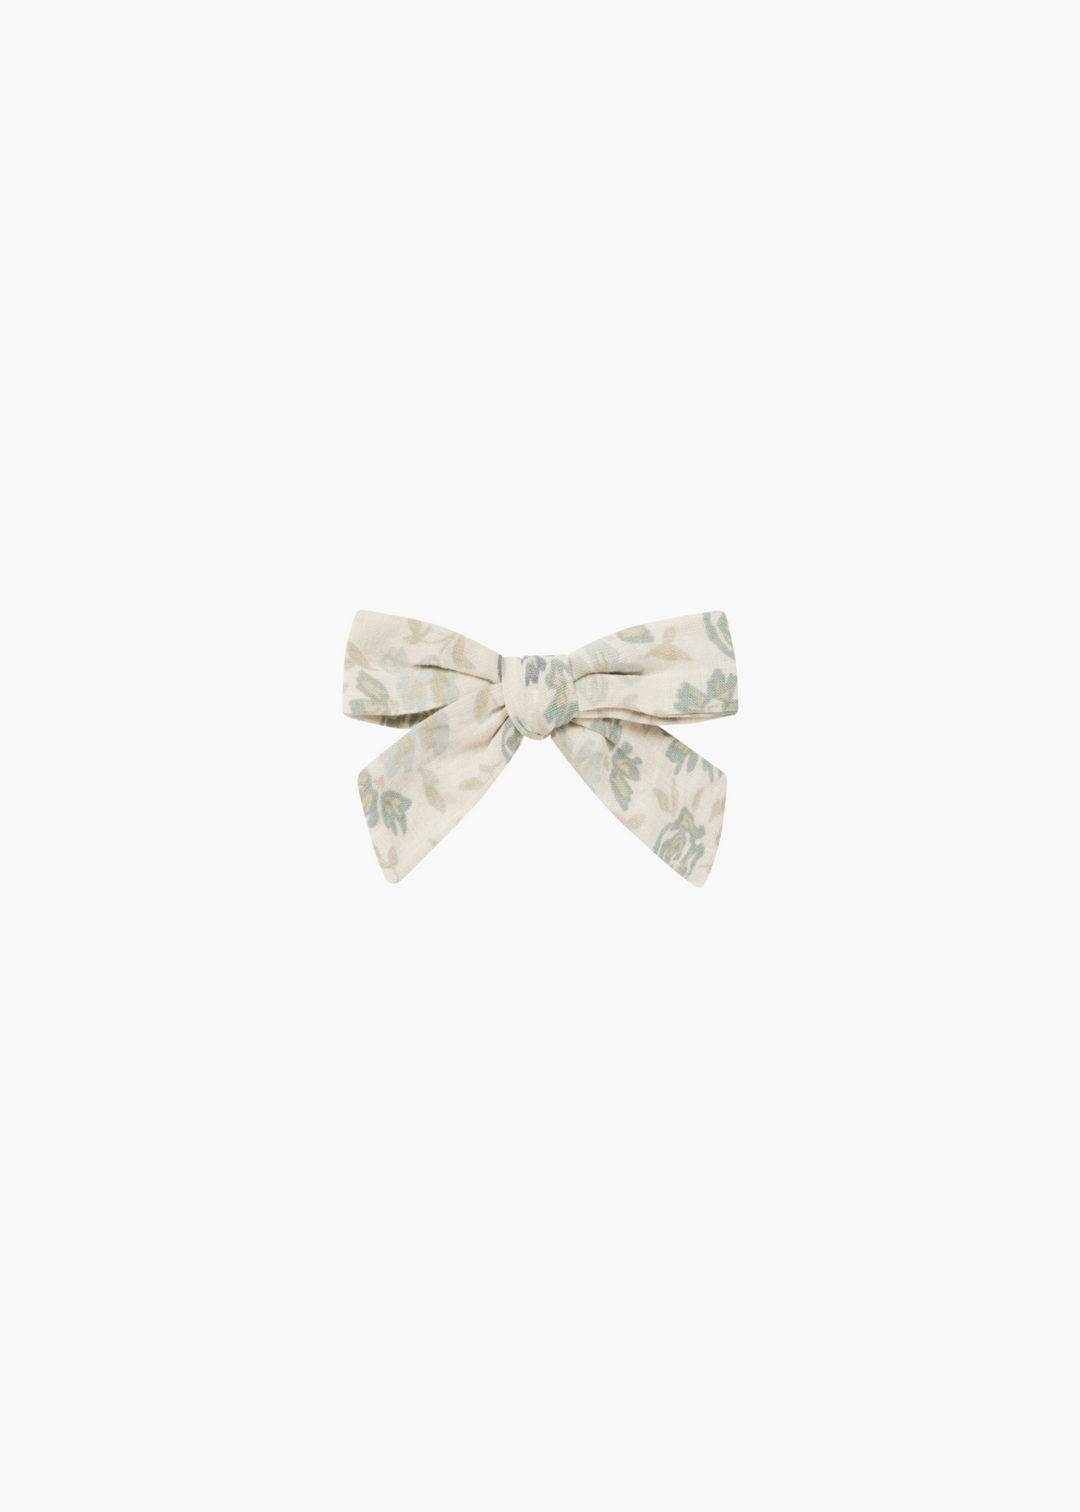 Girl Bow || Blue Floral